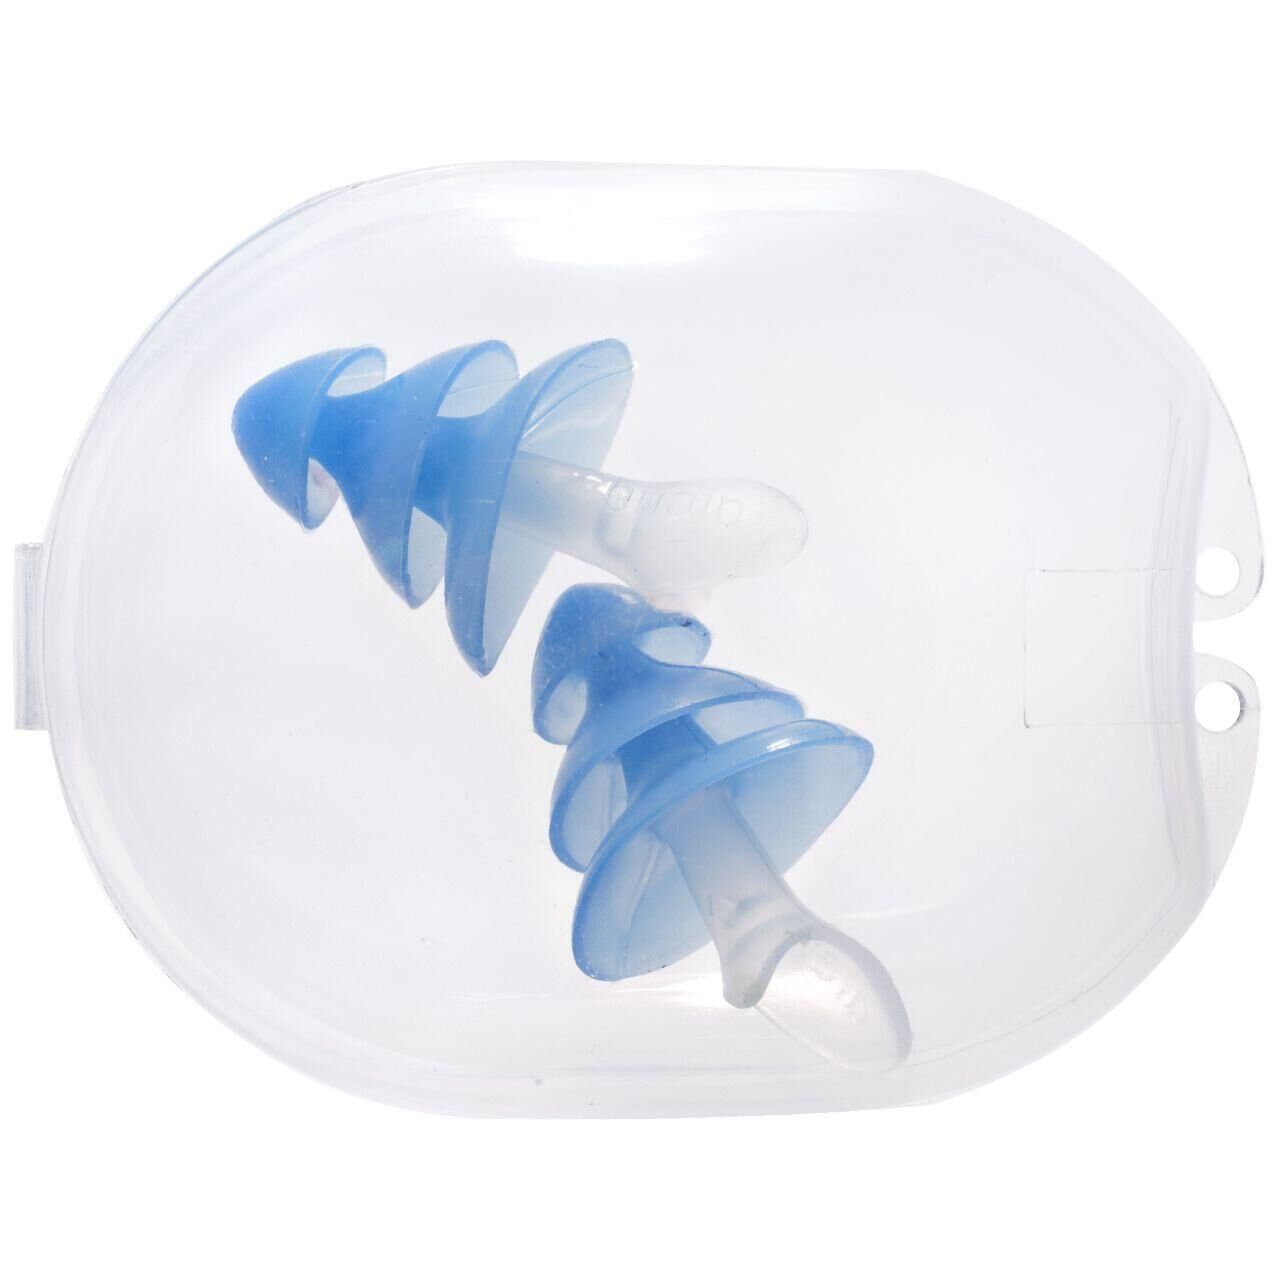 ARENA Arena Ear Plug Pro Swimmers Ear Plugs